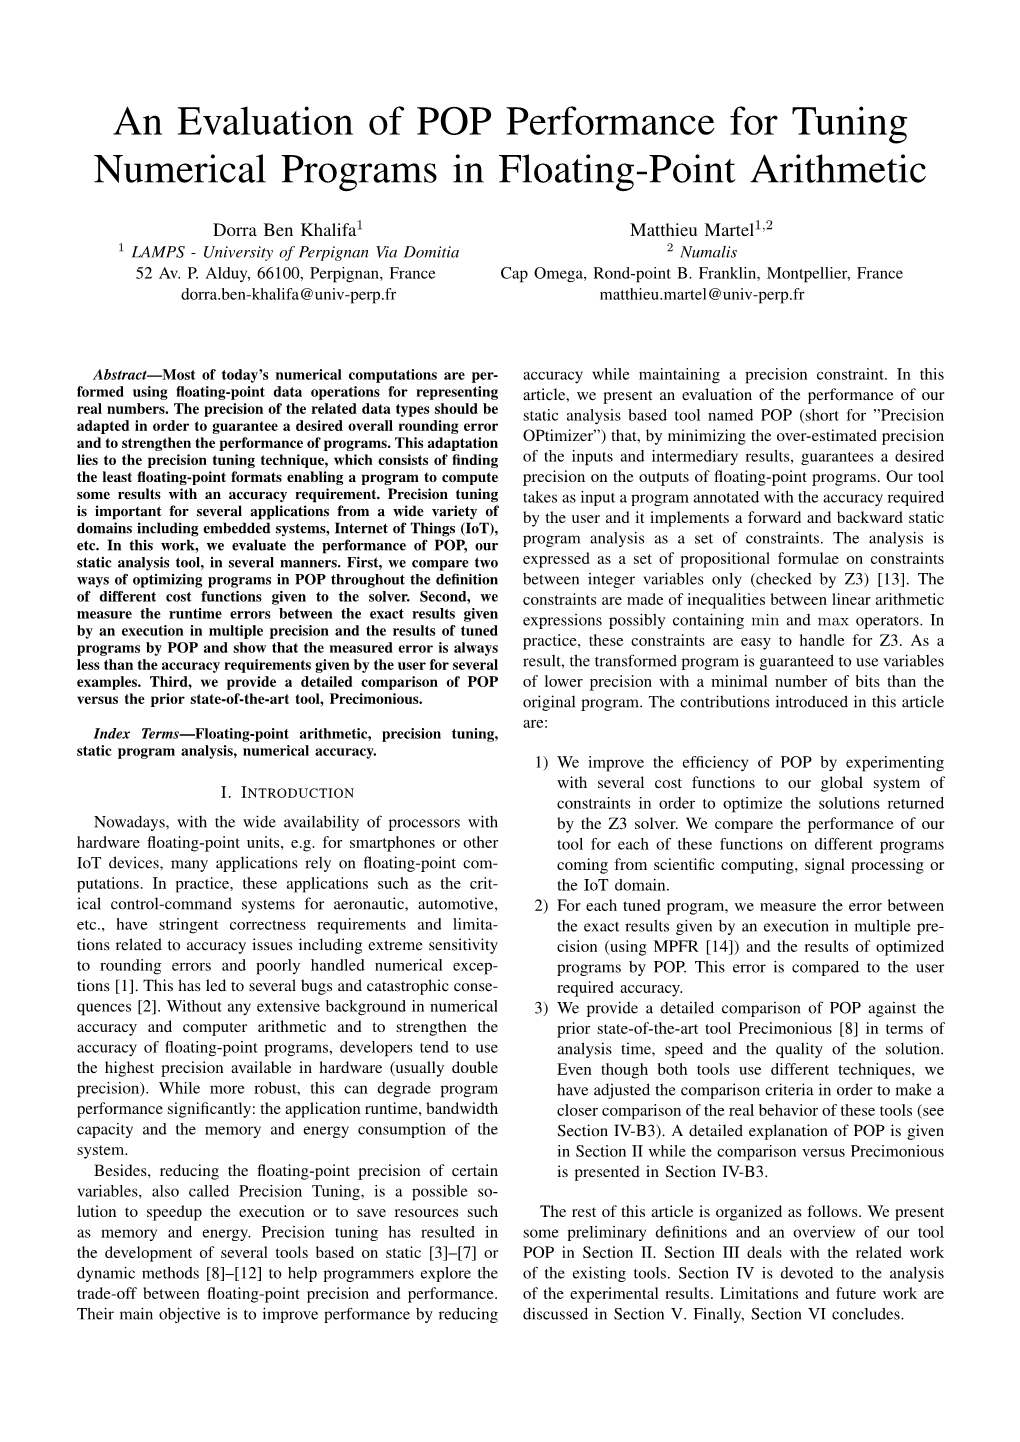 An Evaluation of POP Performance for Tuning Numerical Programs in Floating-Point Arithmetic